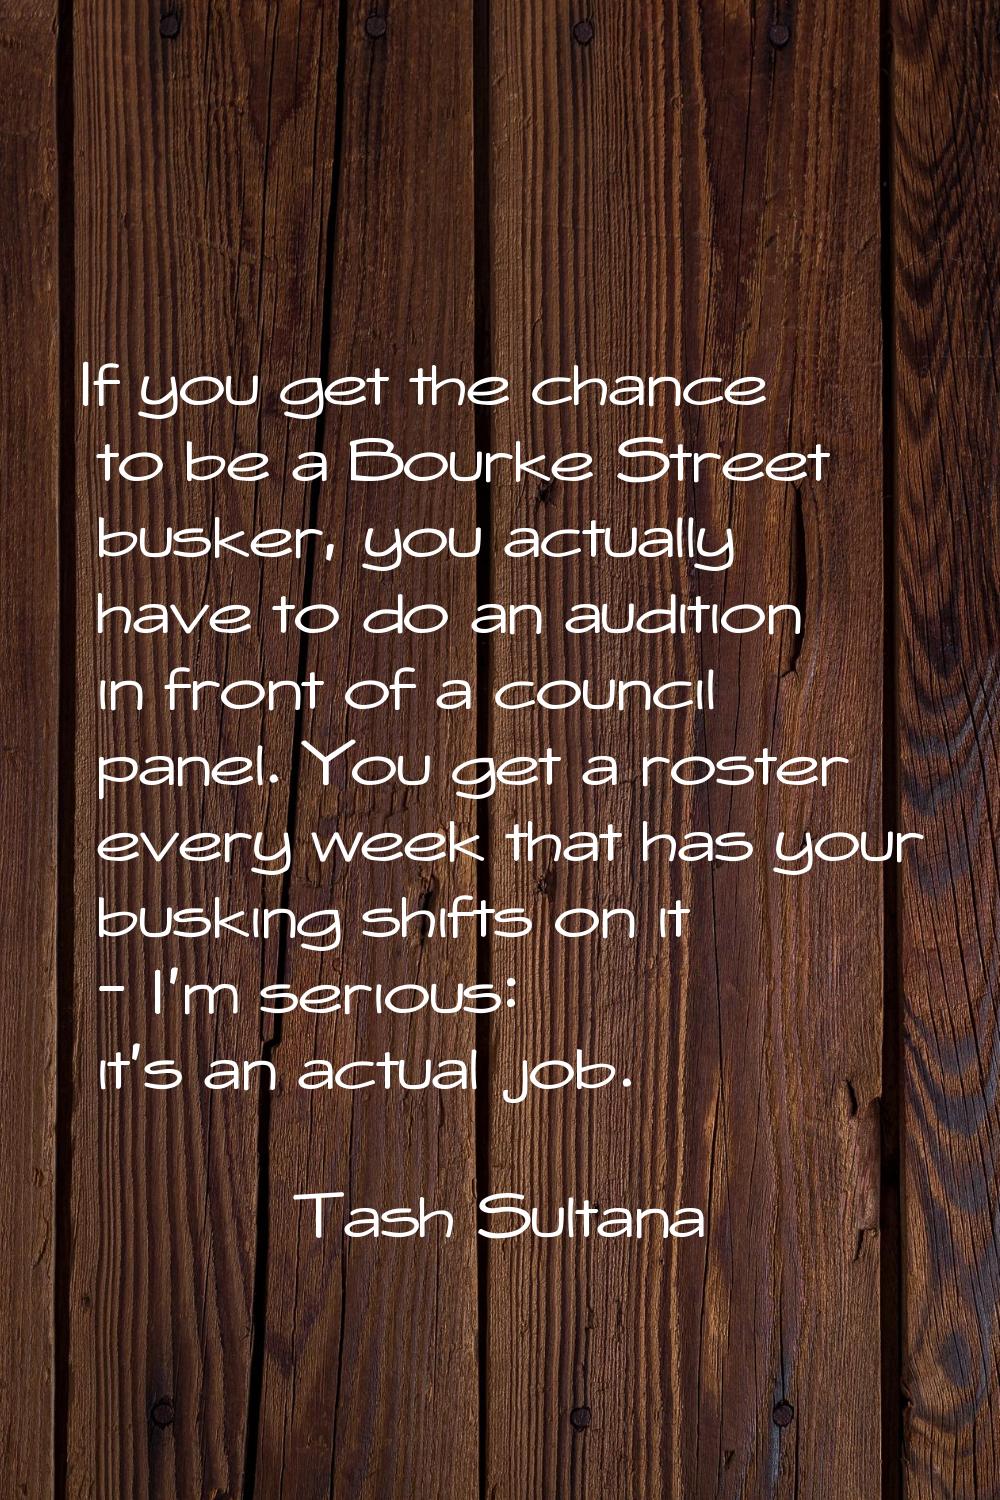 If you get the chance to be a Bourke Street busker, you actually have to do an audition in front of